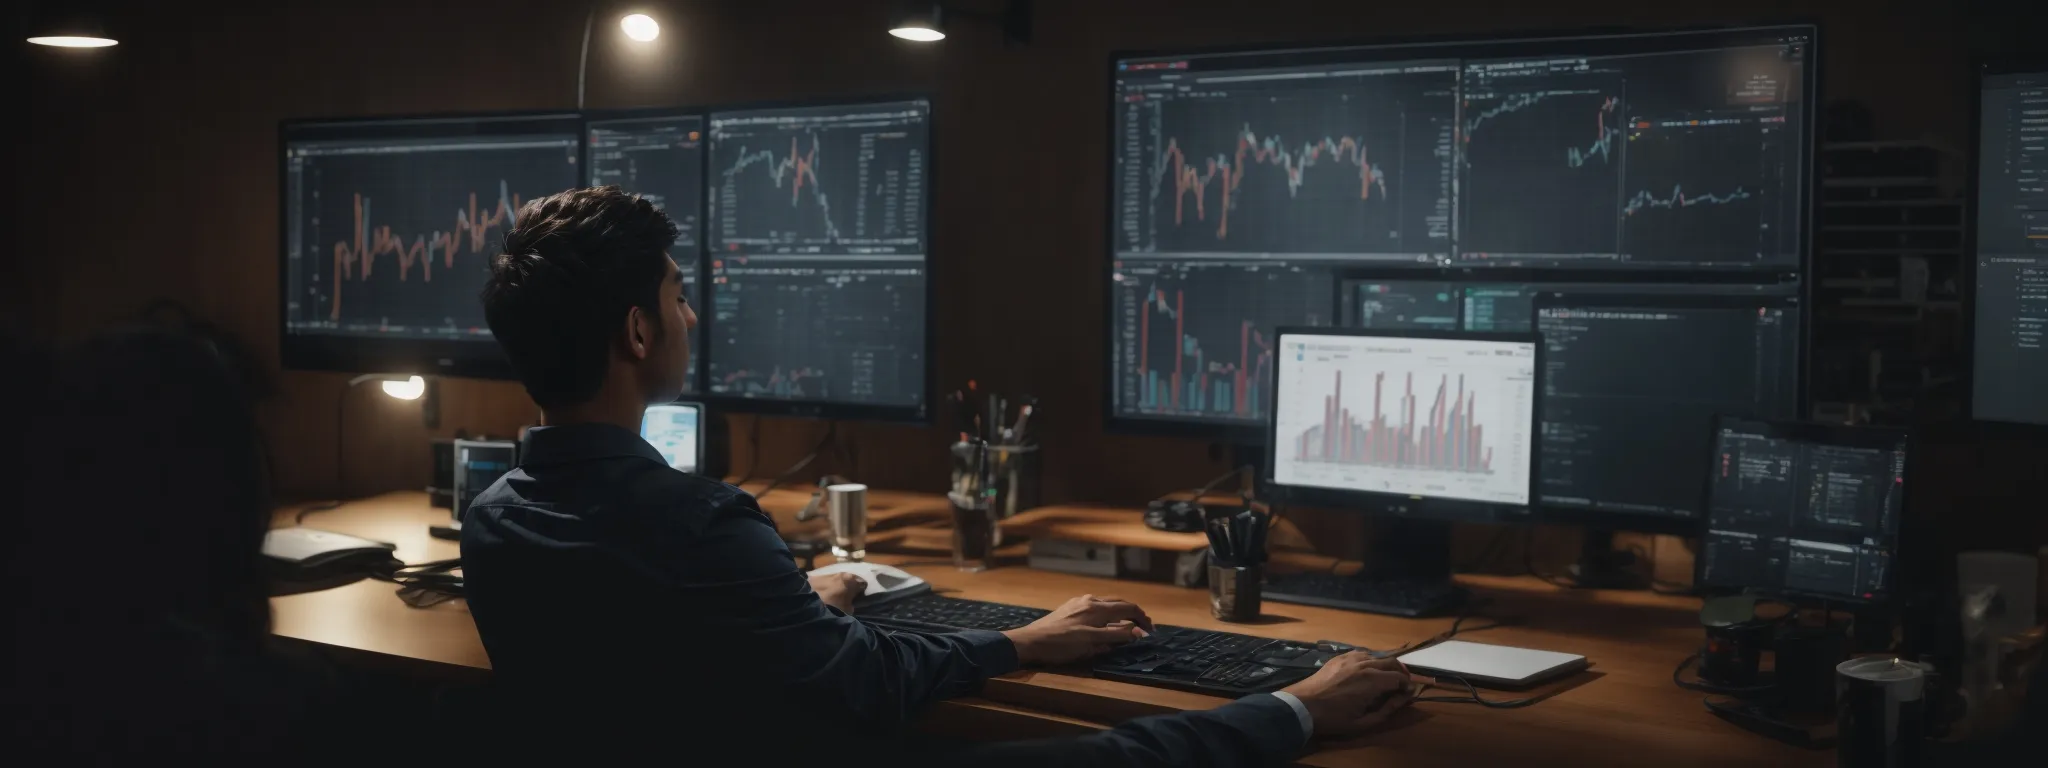 a person sitting at a computer, visibly analyzing data graphs on the screen while surrounded by digital marketing strategy icons.